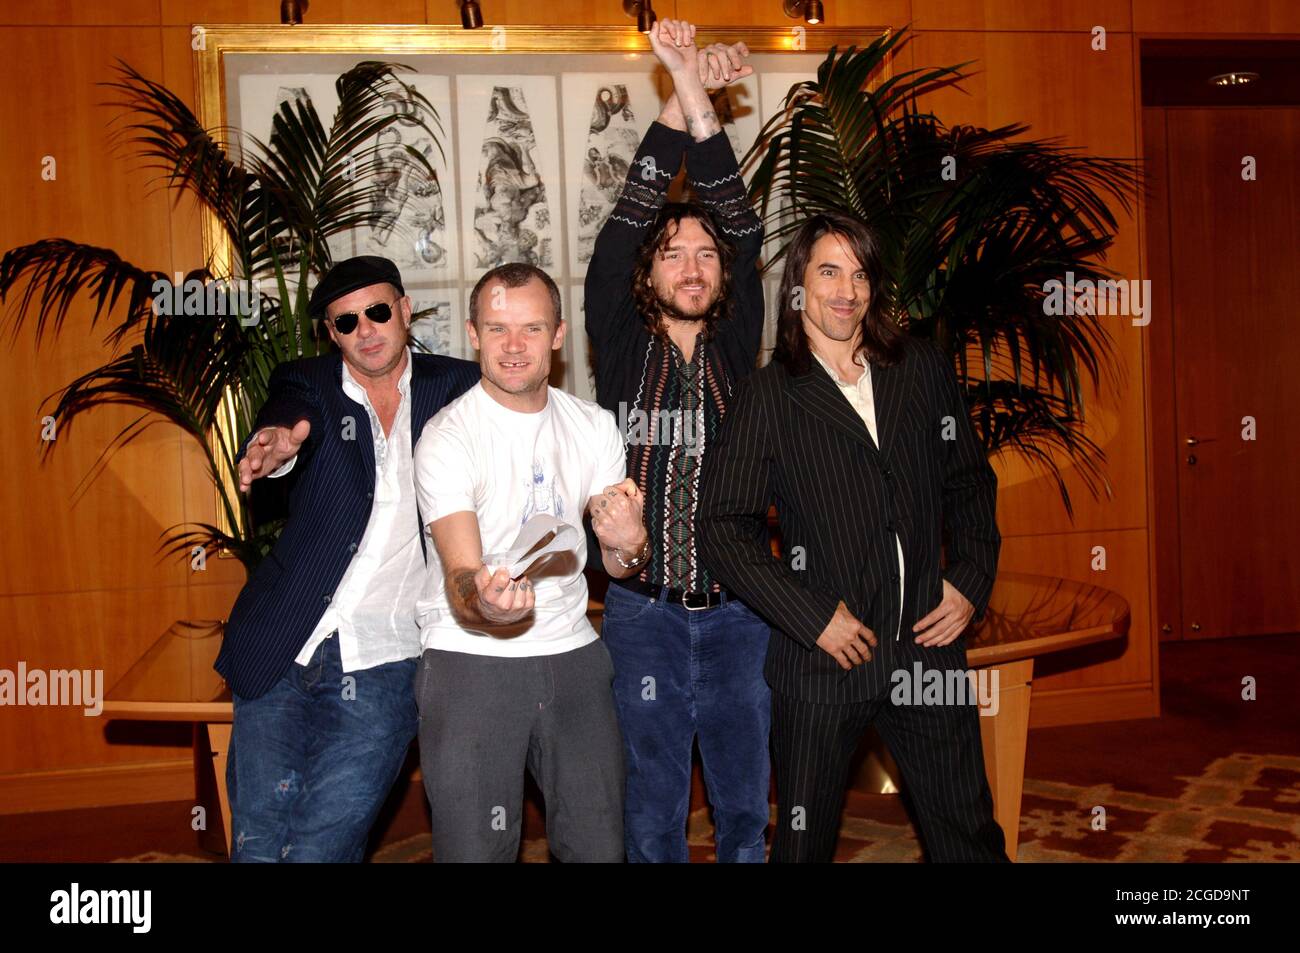 Milan Italy  28/04/2006 ,photo session of the Red Hot Chili Peppers at the Four Season Hotel :  Chad Smith, Flea, John Frusciante, Anthony Kiedis Stock Photo